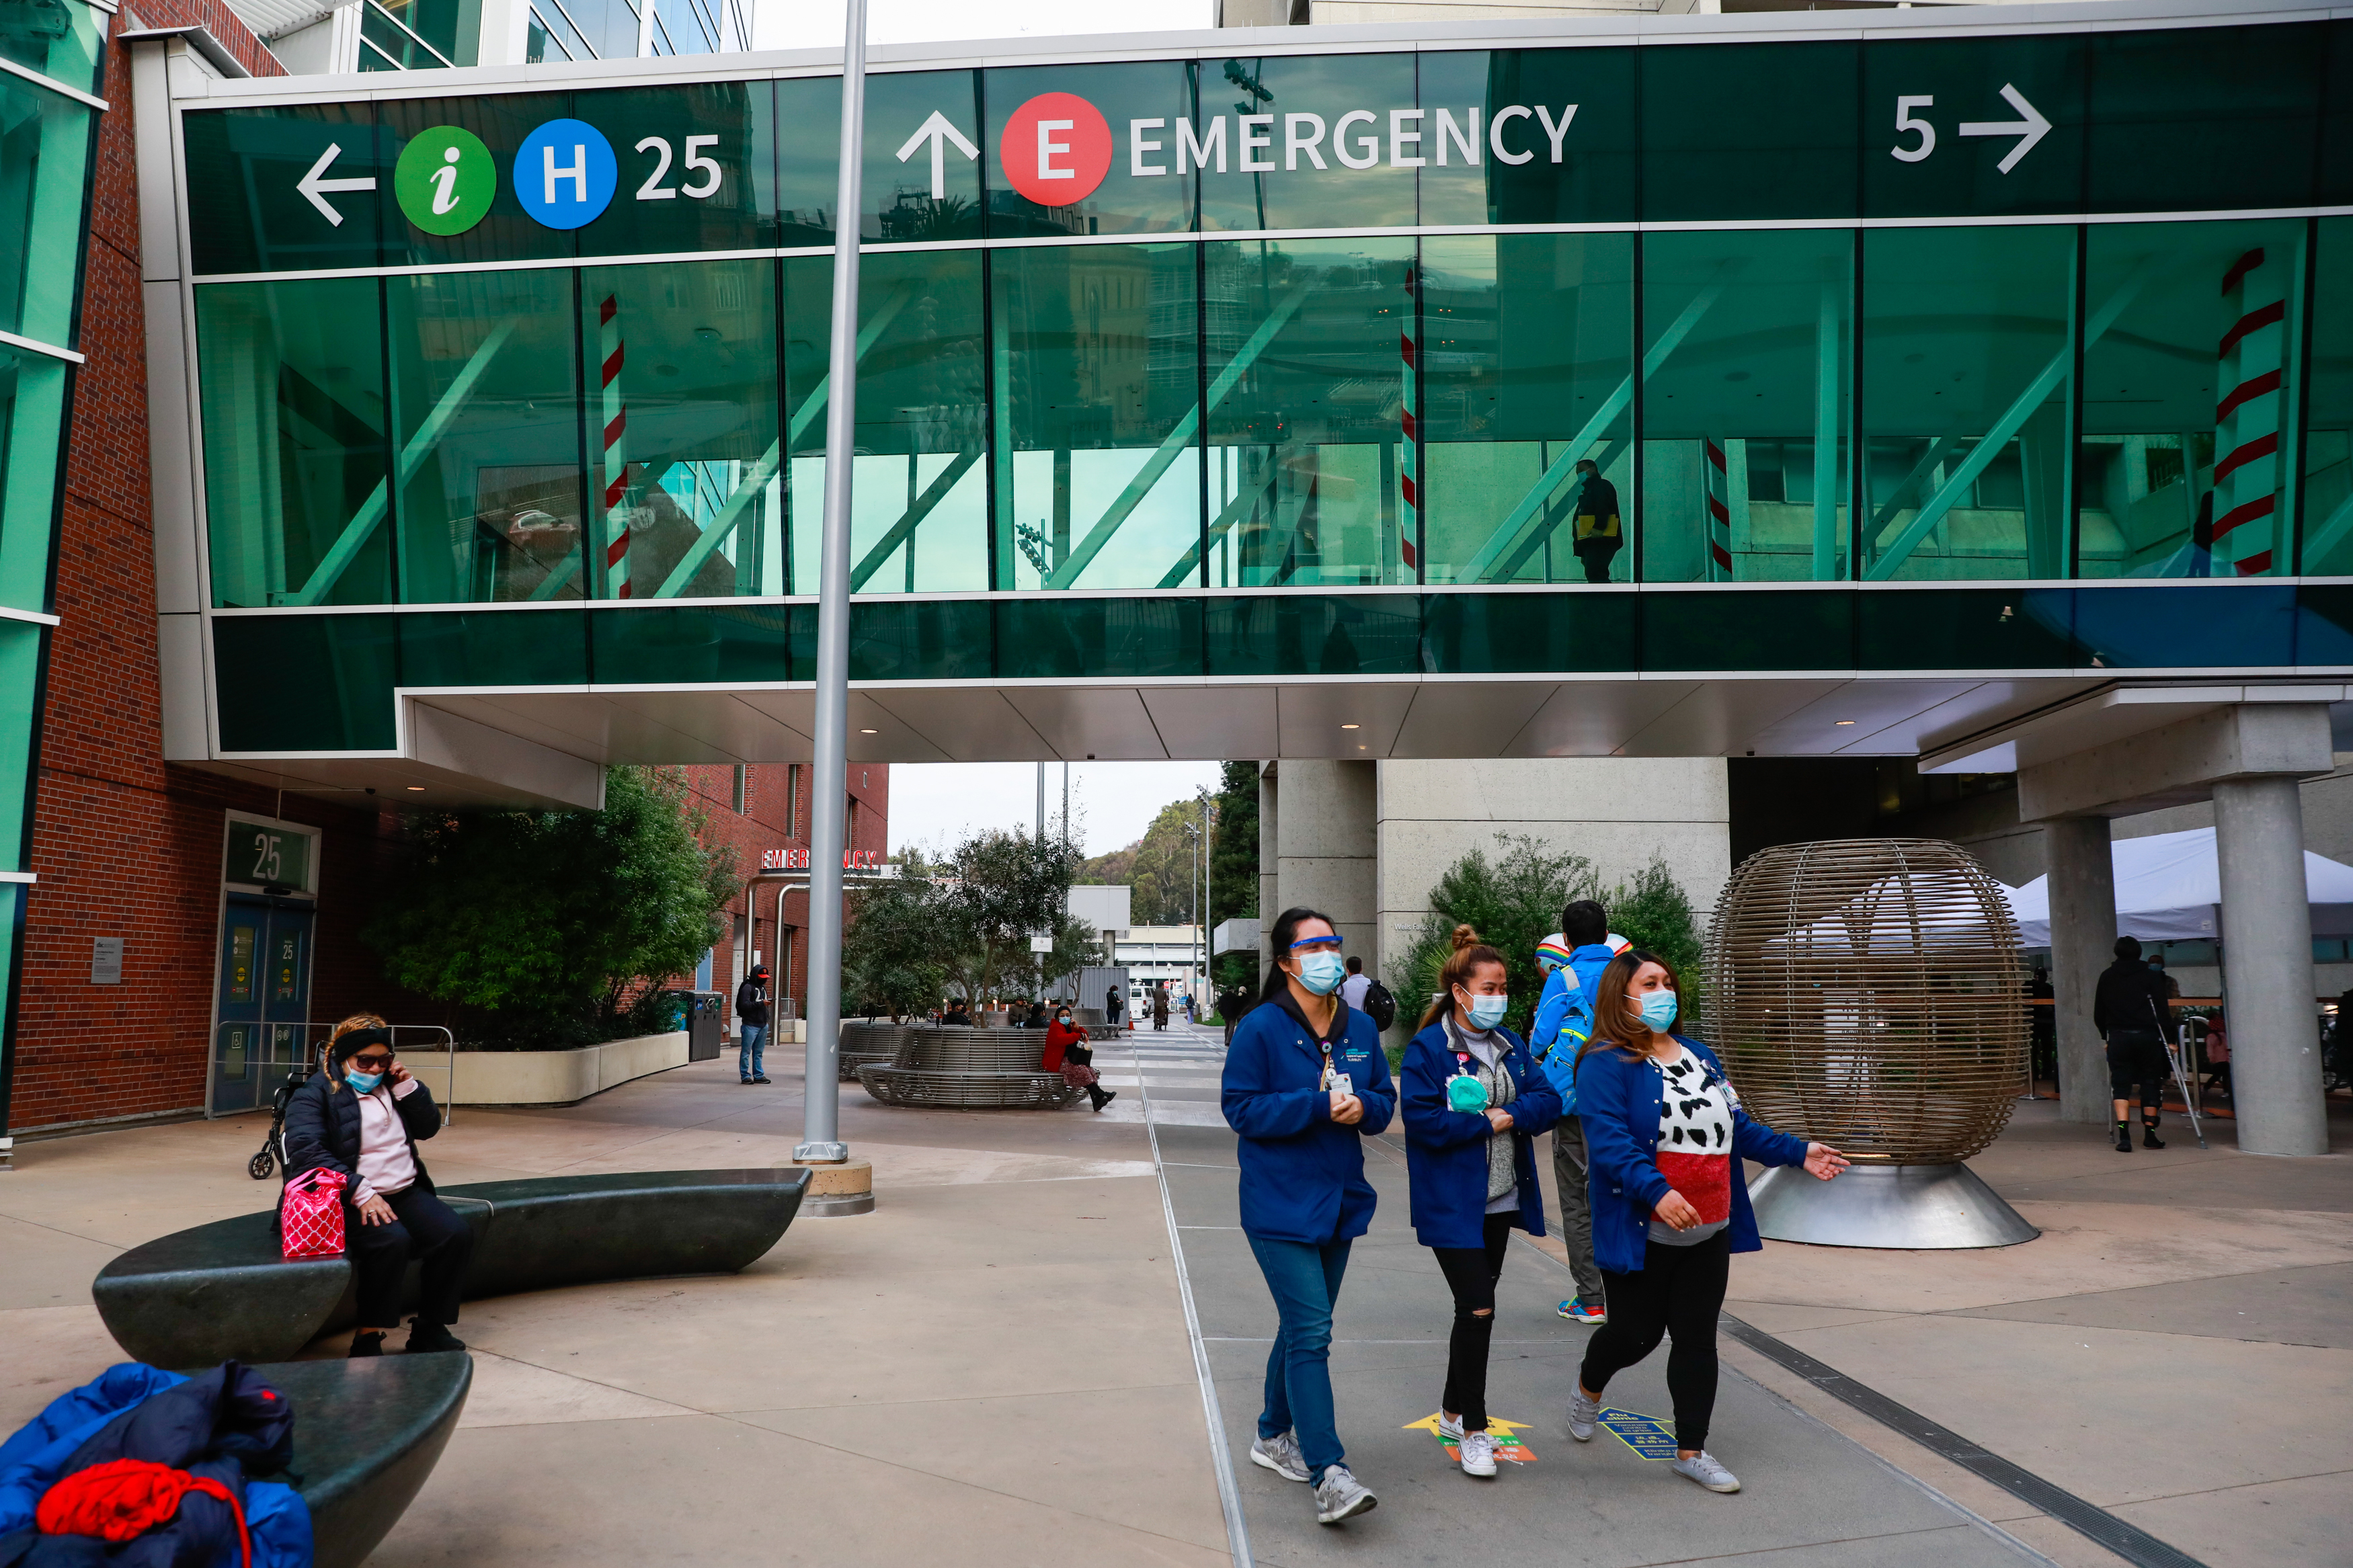 Four people wearing masks walk under a glass bridge with signs overhead pointing to information, hospital, and emergency departments.